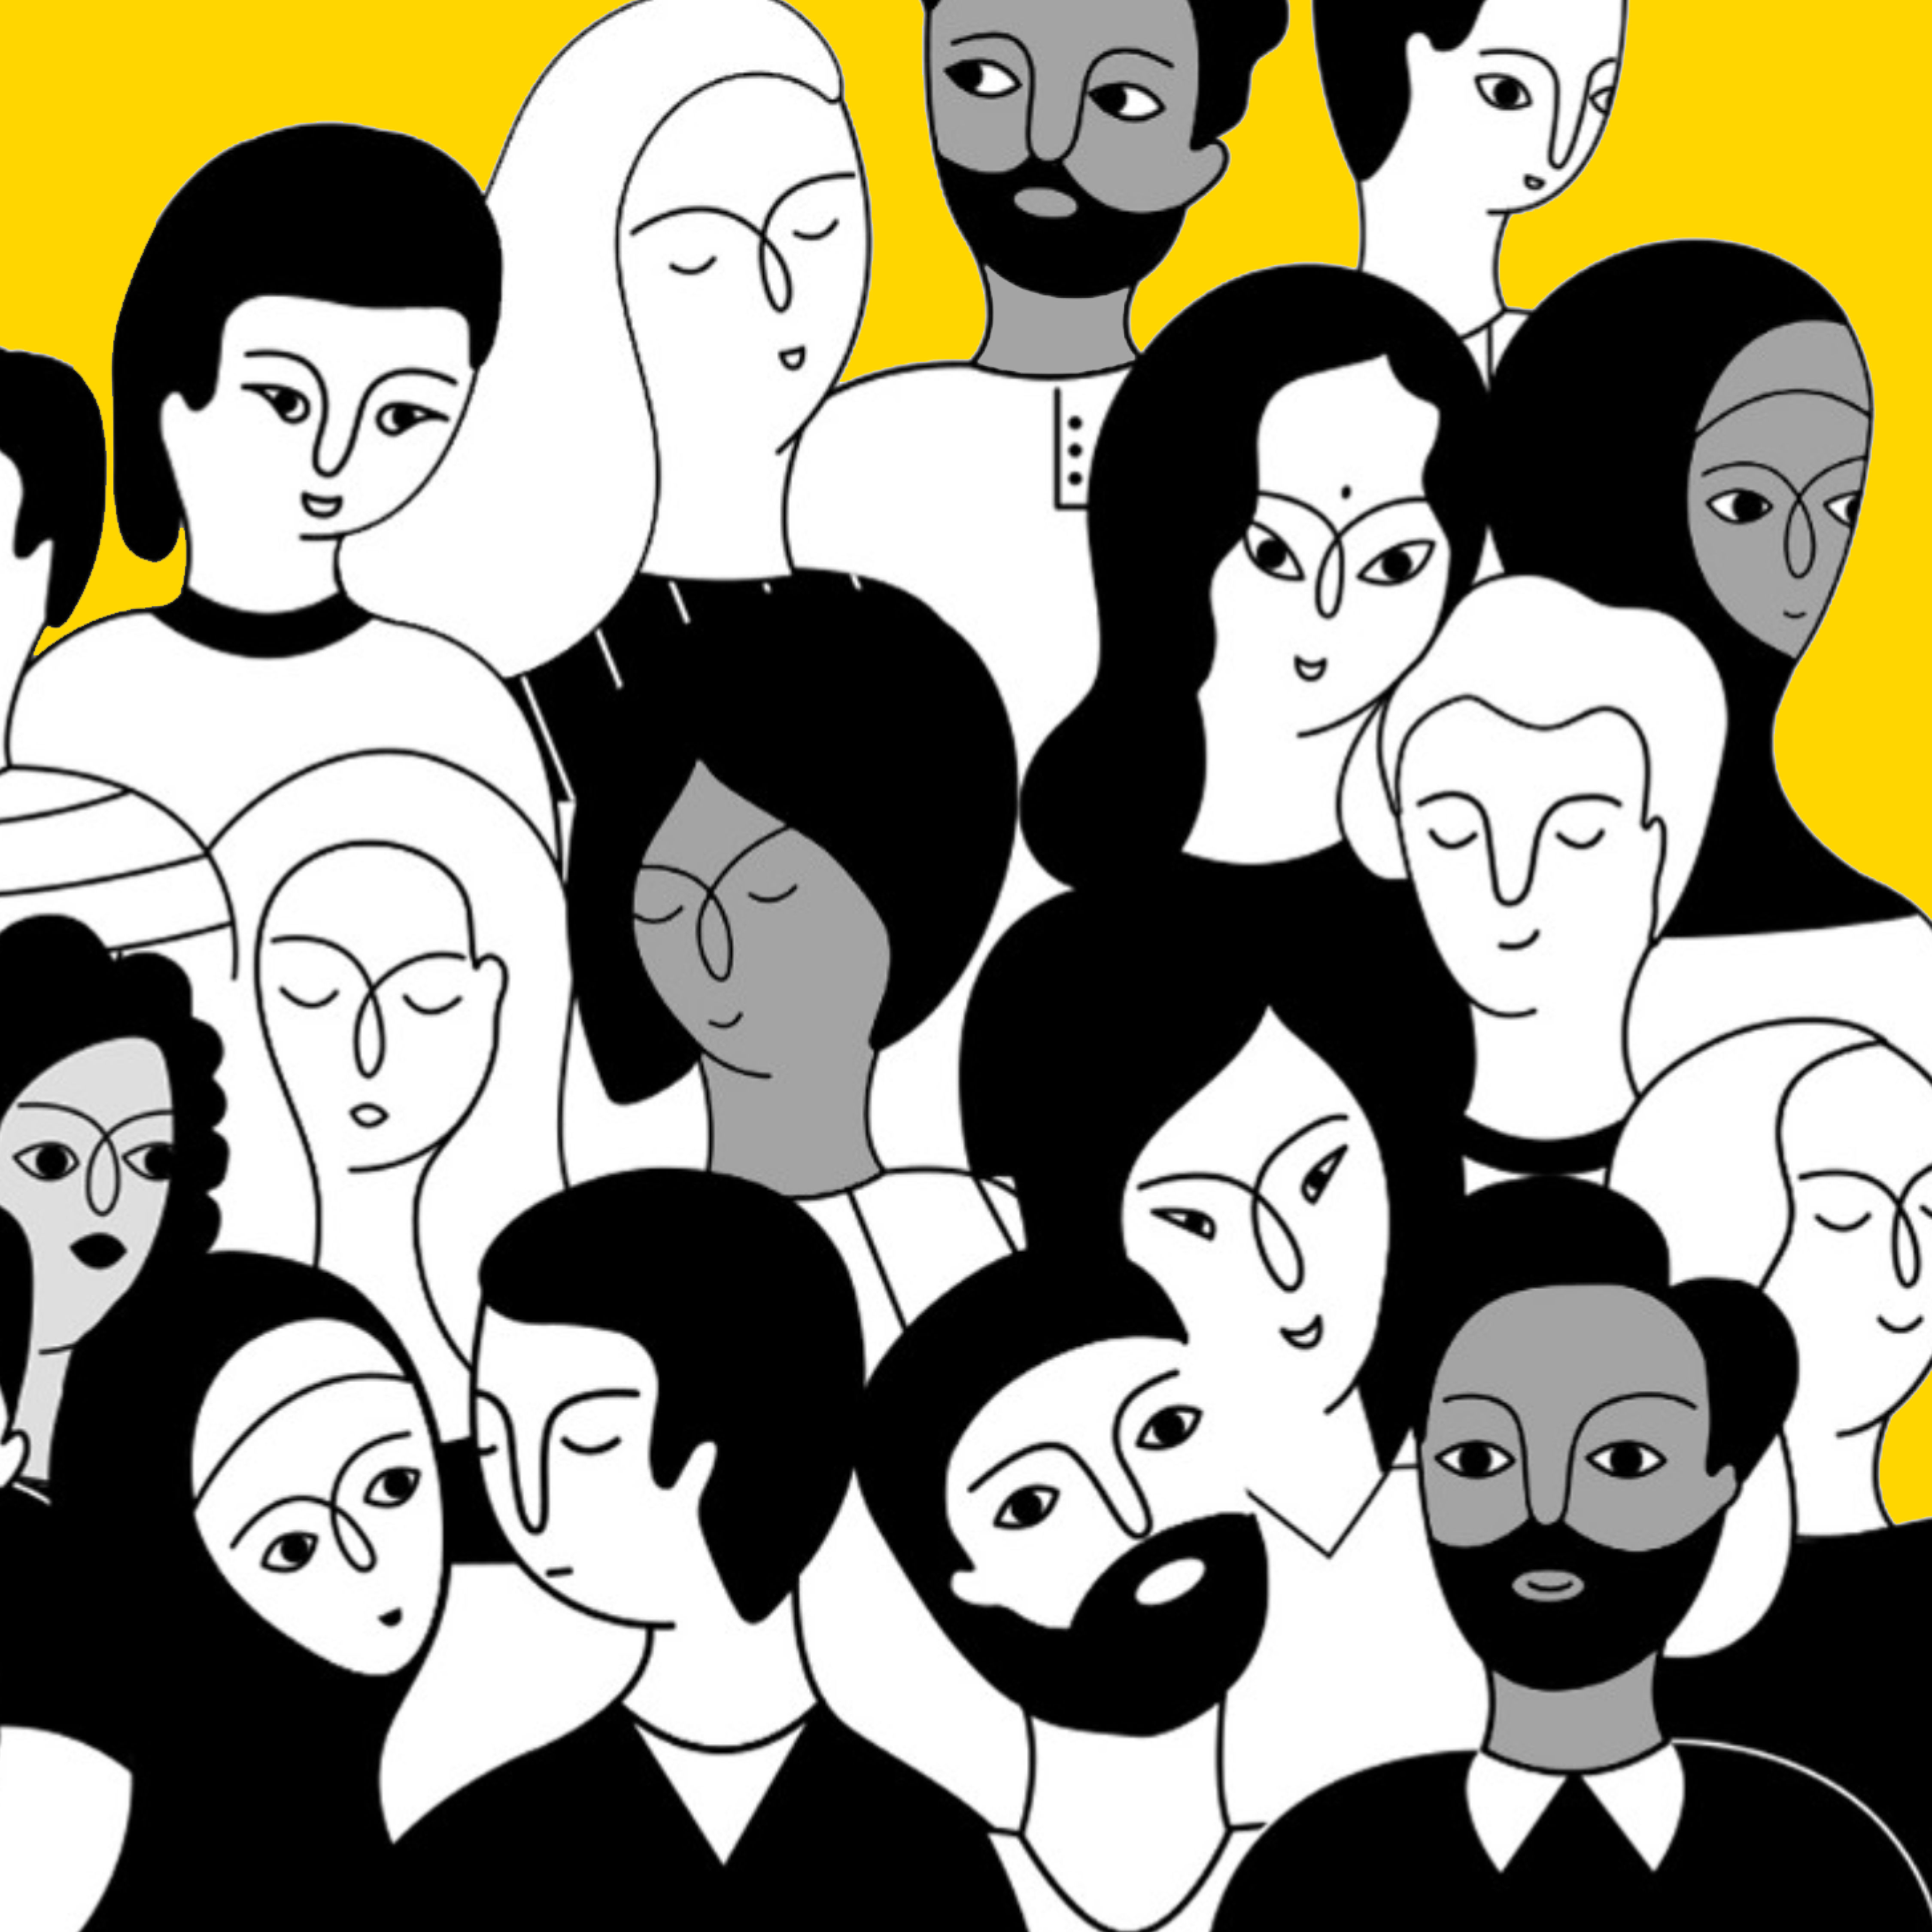 multiple drawn people in black and white